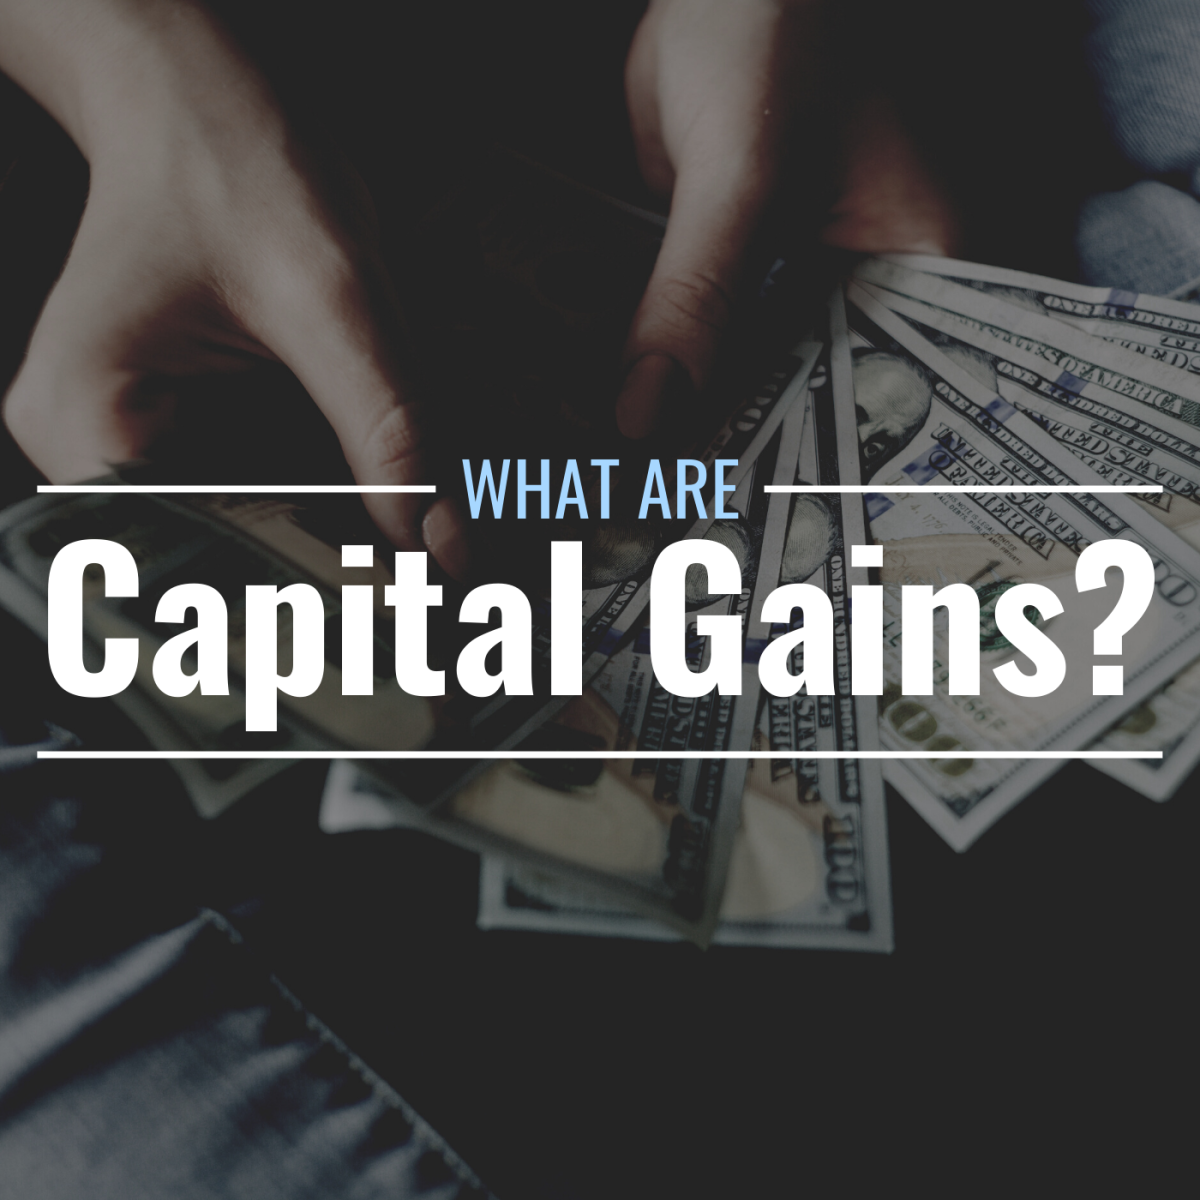 A darkened, closeup photo of a pair of hands fanning a wad of $100 bills with text overlay that reads "What Are Capital Gains?"